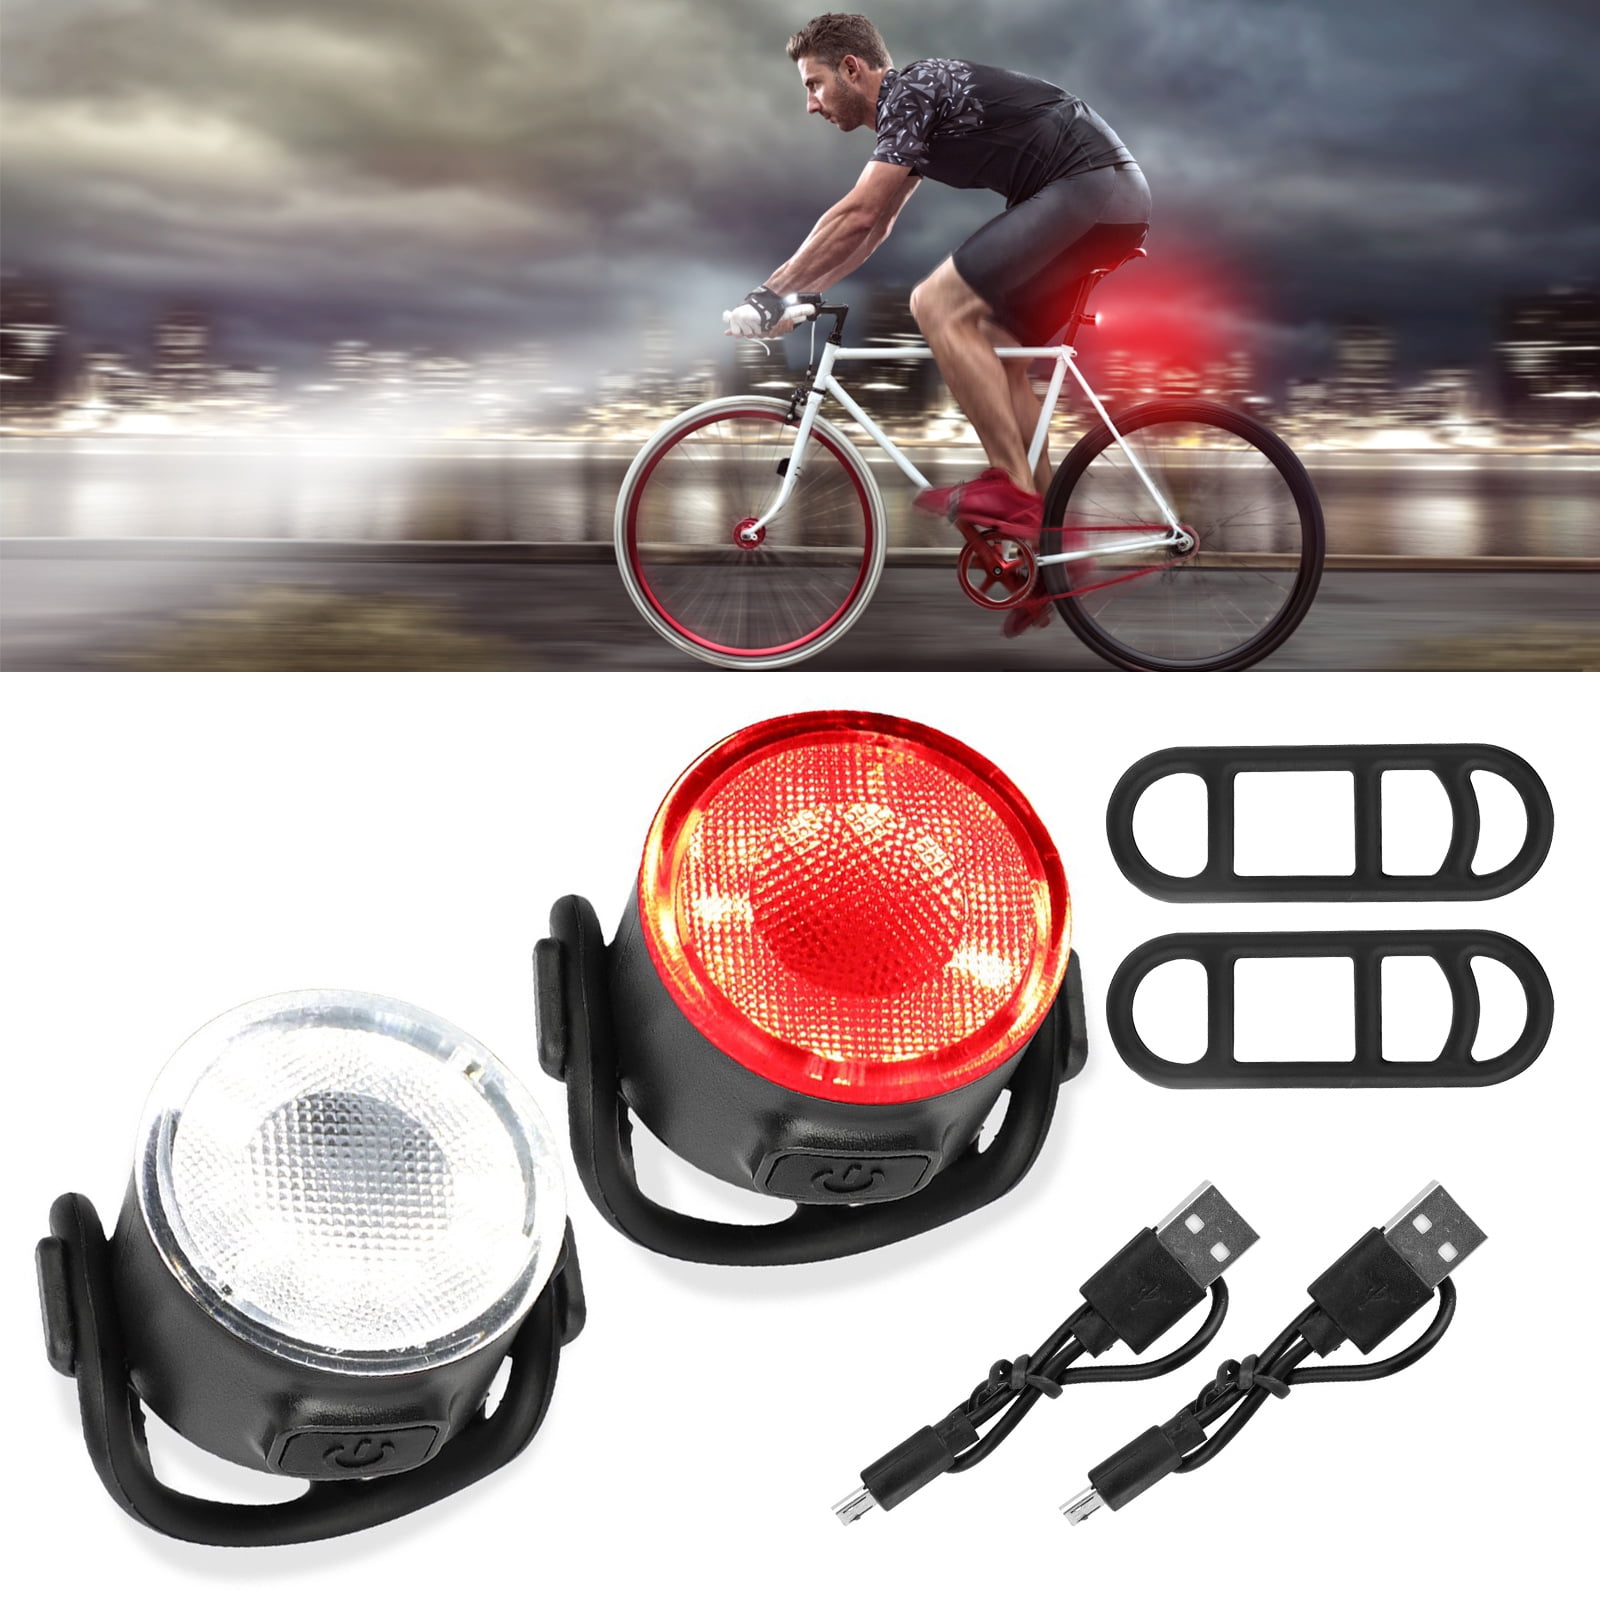 Waterproof Super Bright Rear Tail Light Lamp 3 Modes for Bicycle Bike Cycling